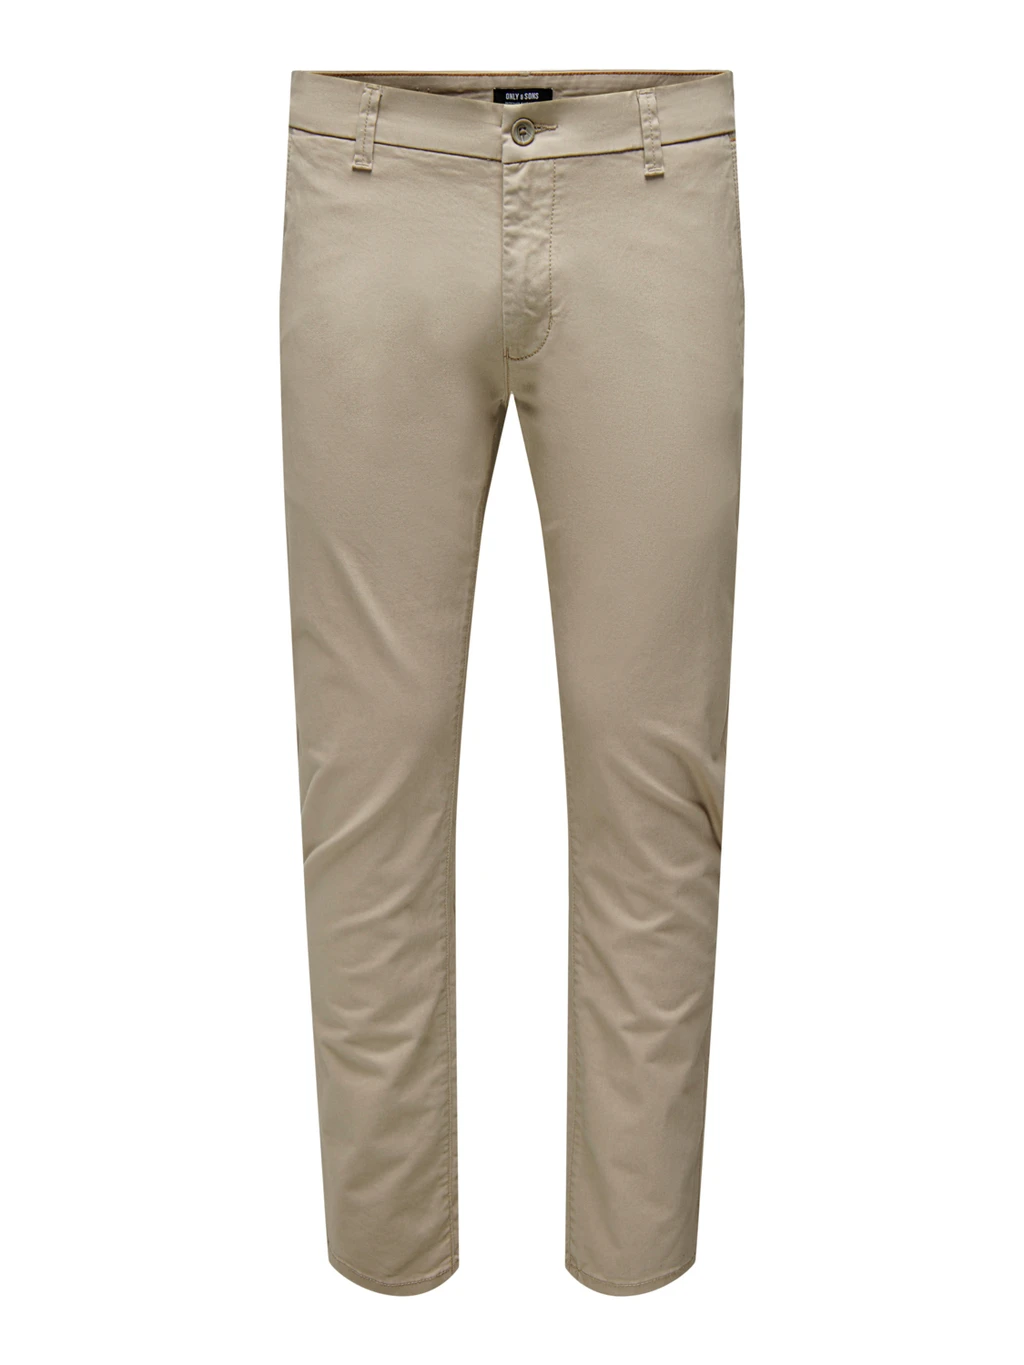 ONLY & SONS 0022 PETTE CHINO ΠΑΝΤΕΛΟΝΙ